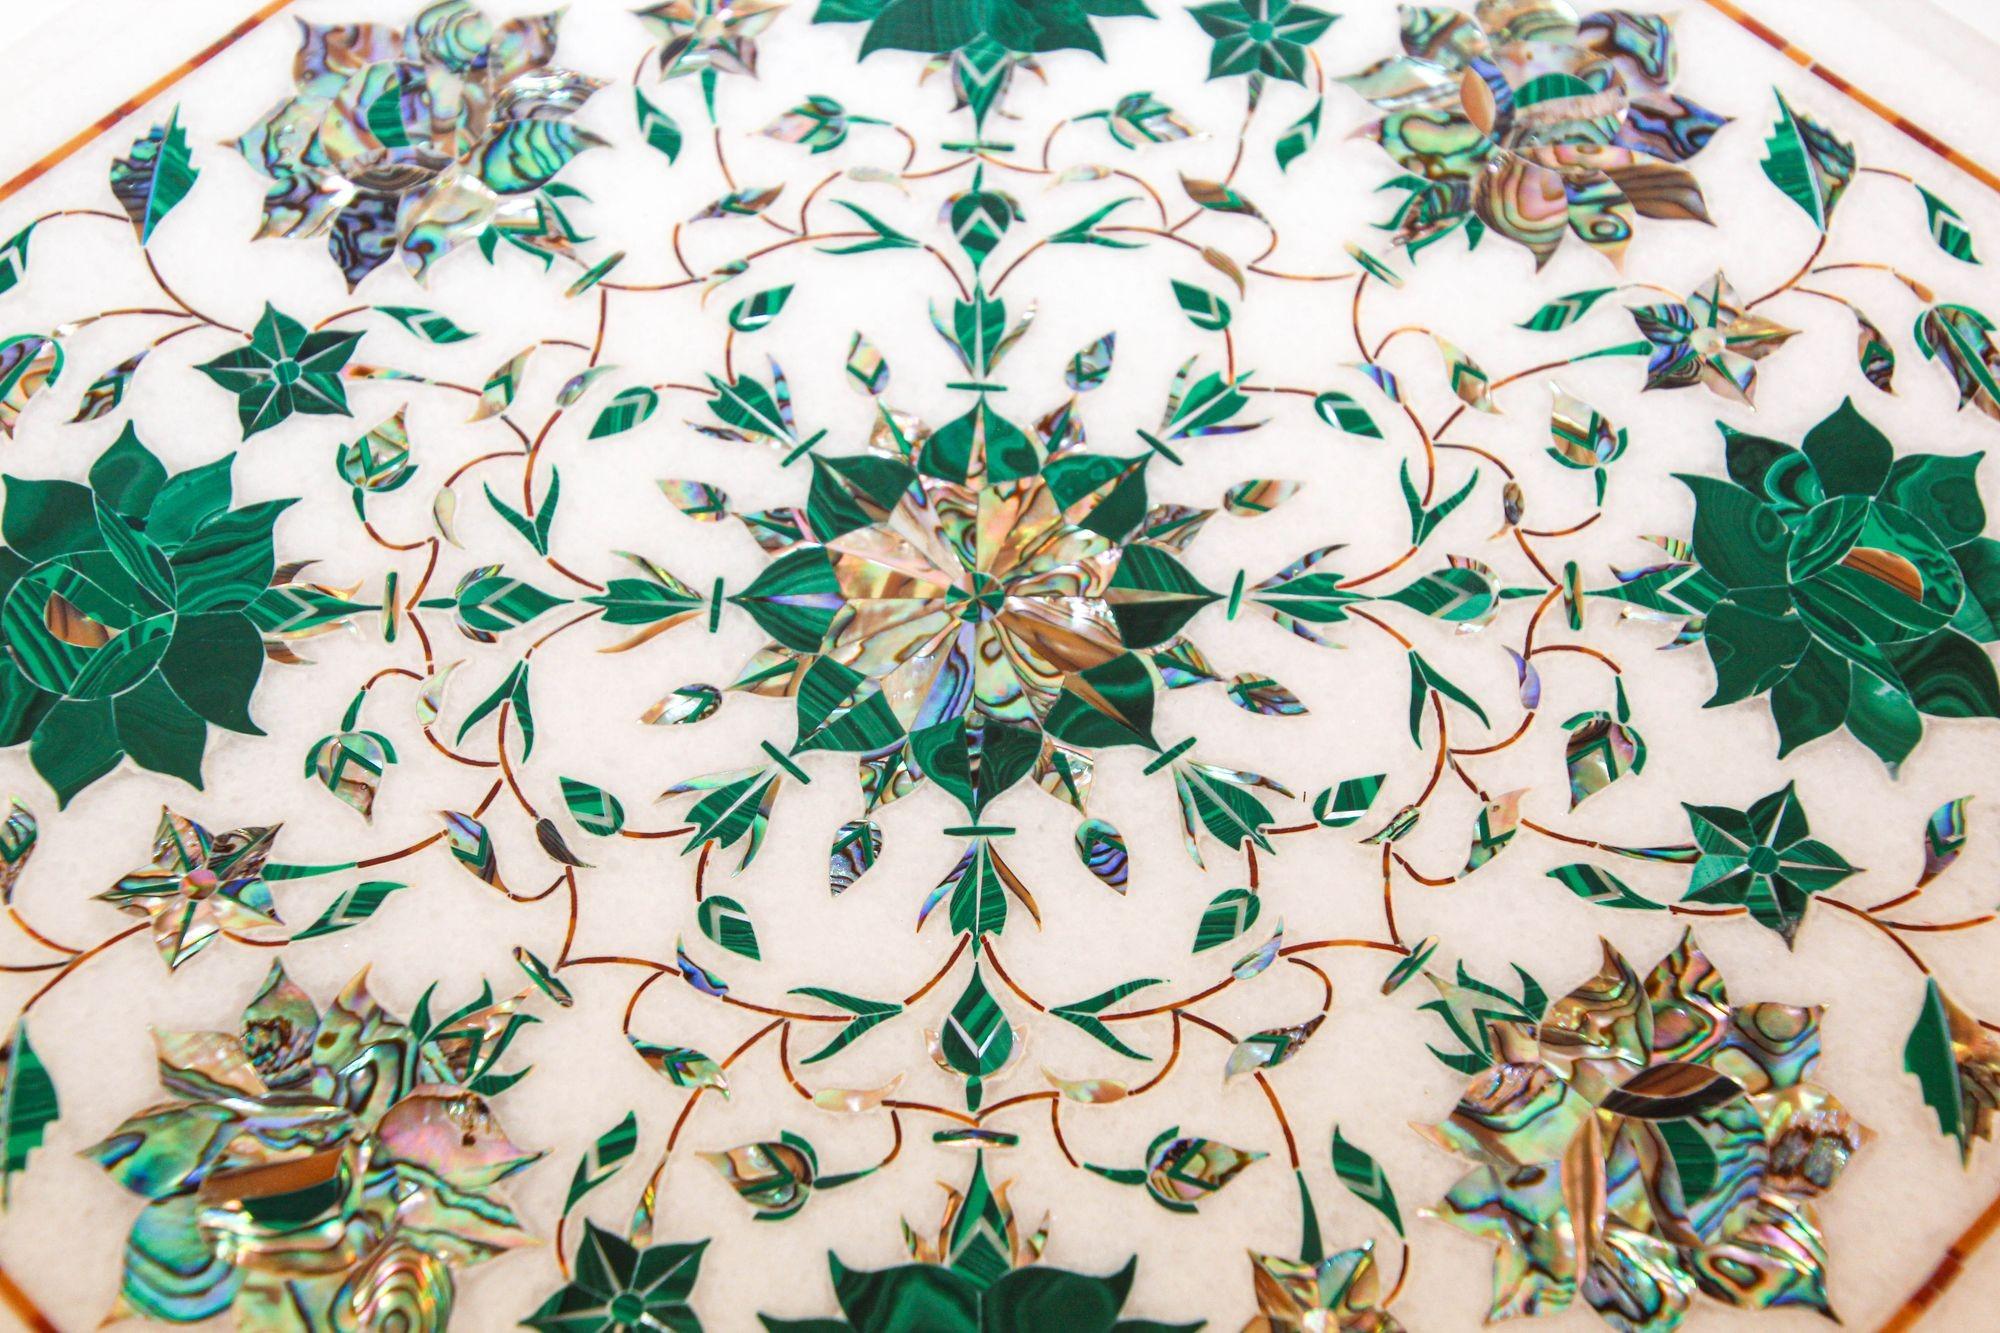 Pietra Dura White Mosaic Octagonal Inlaid Marble Top Handcrafted Agra India 1980 For Sale 6